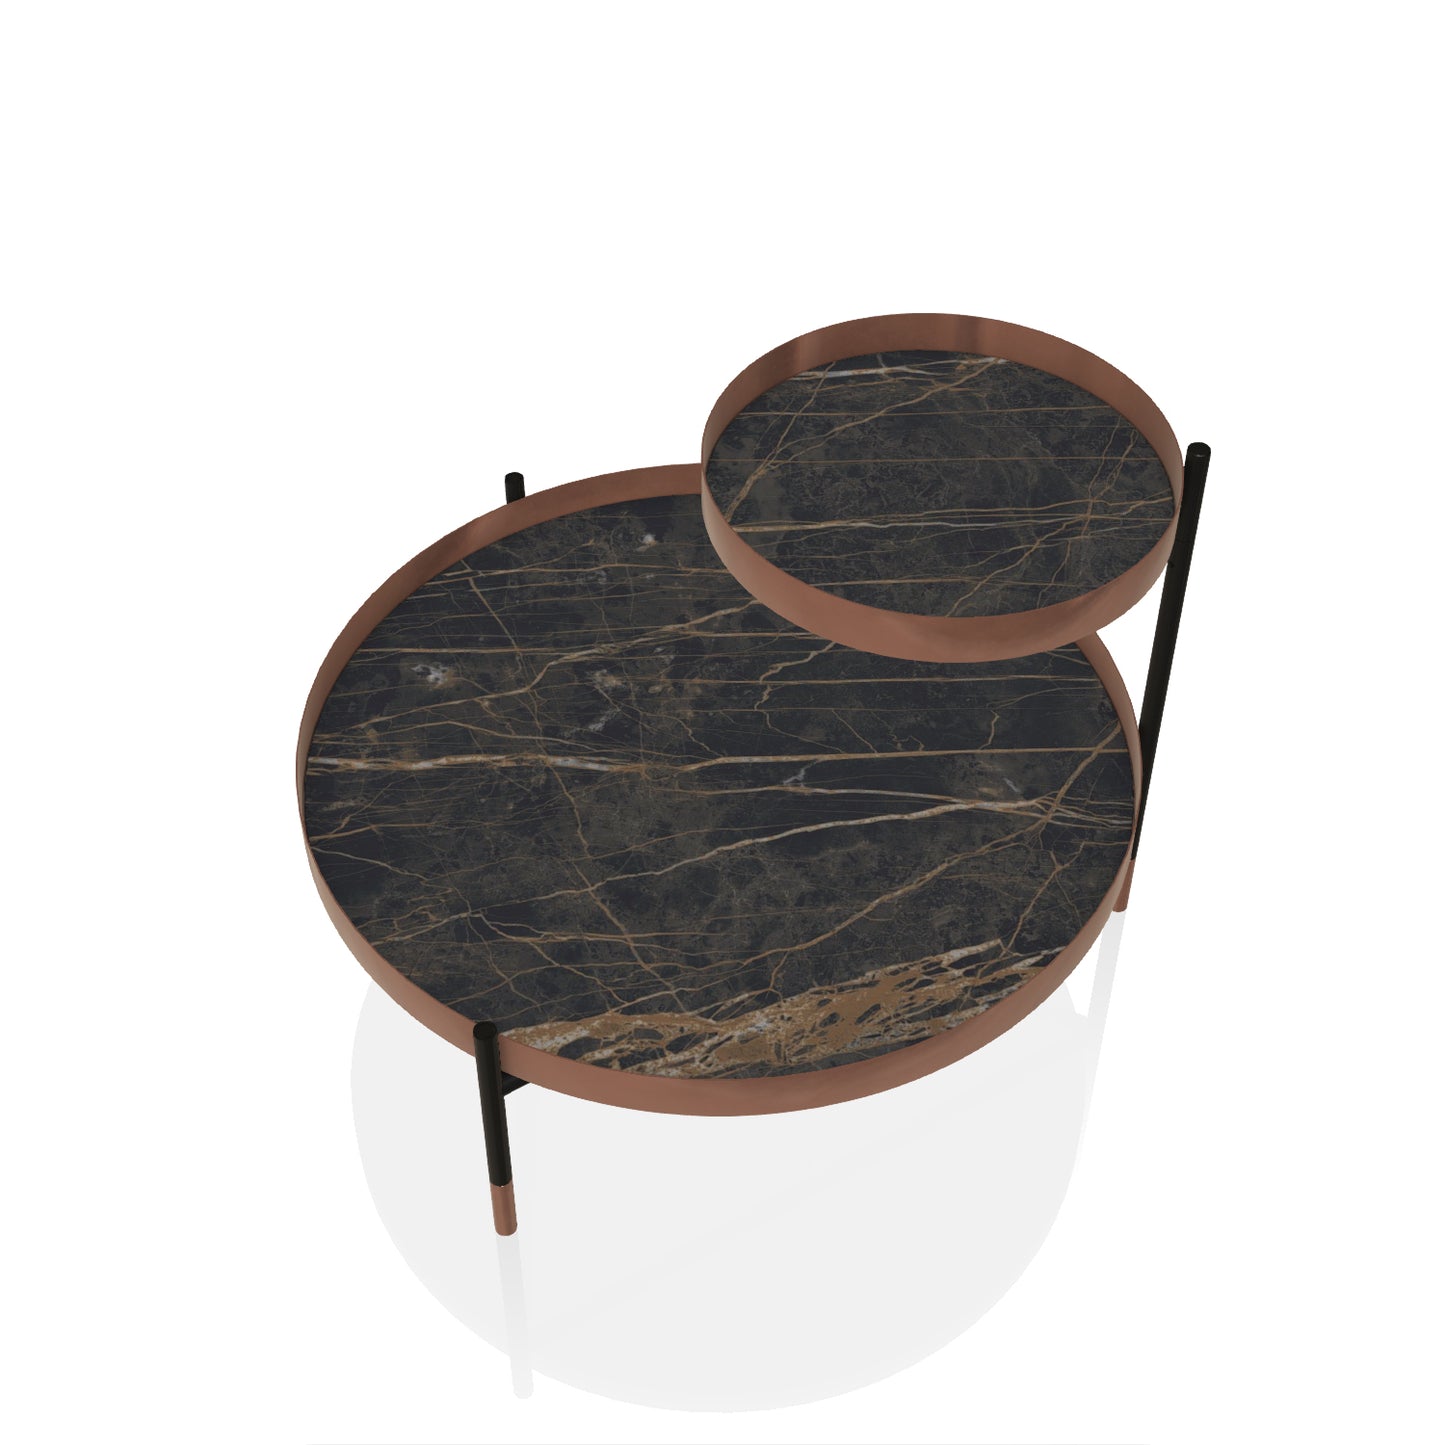 Planet Coffee Table By Bontempi Casa - Matte Noir Desir Super Marble With Rose Gold Base